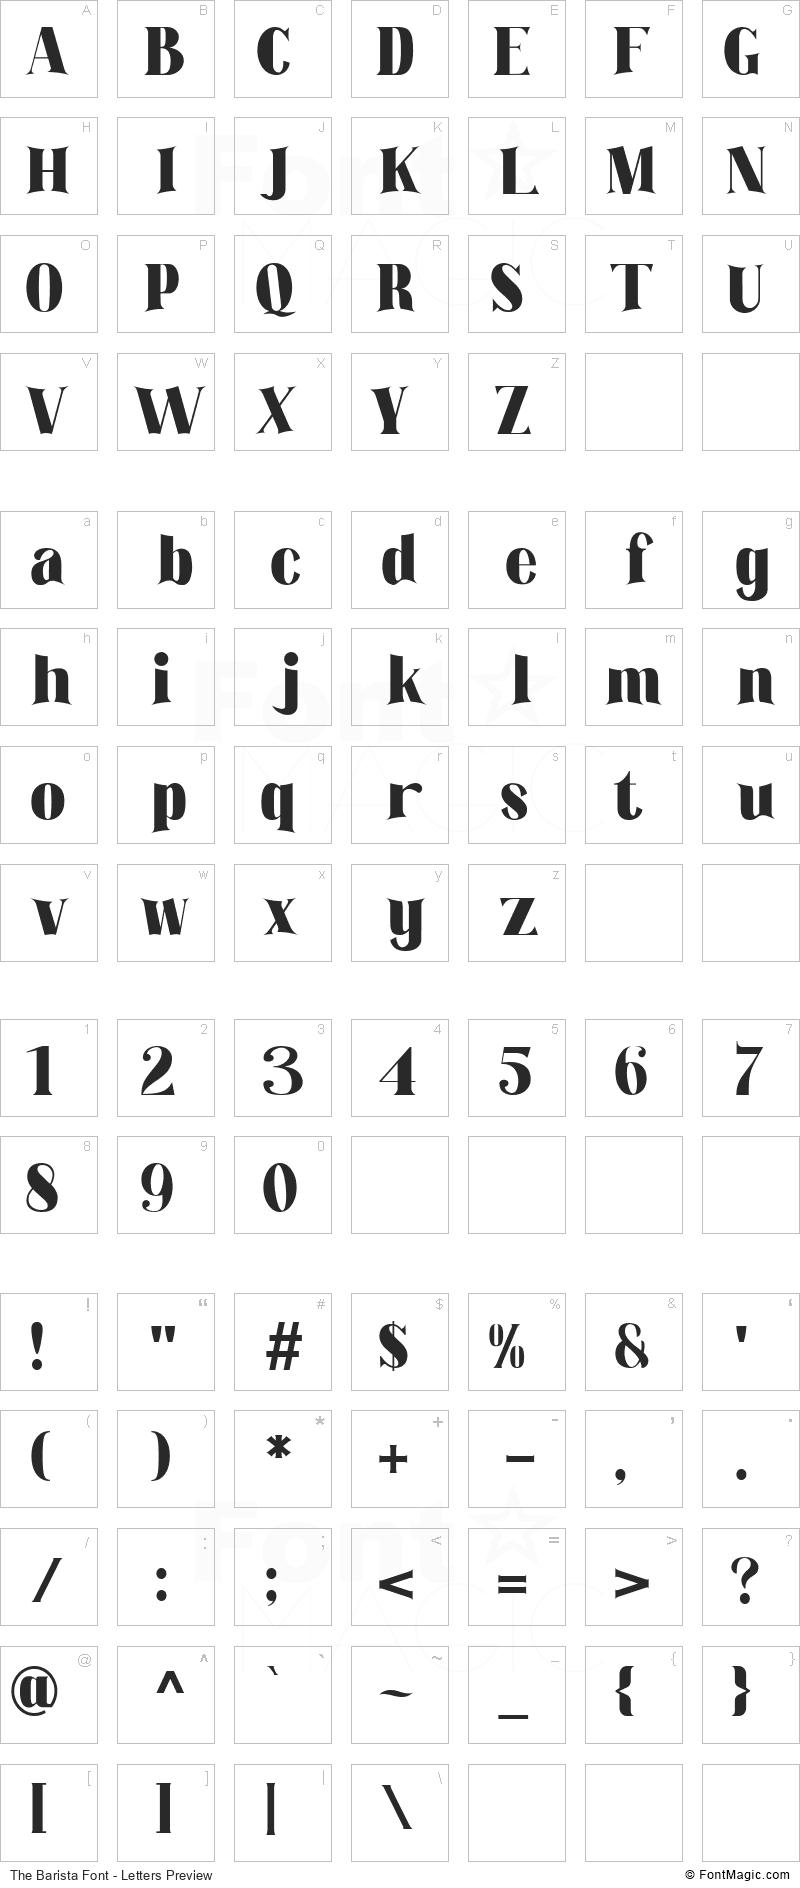 The Barista Font - All Latters Preview Chart